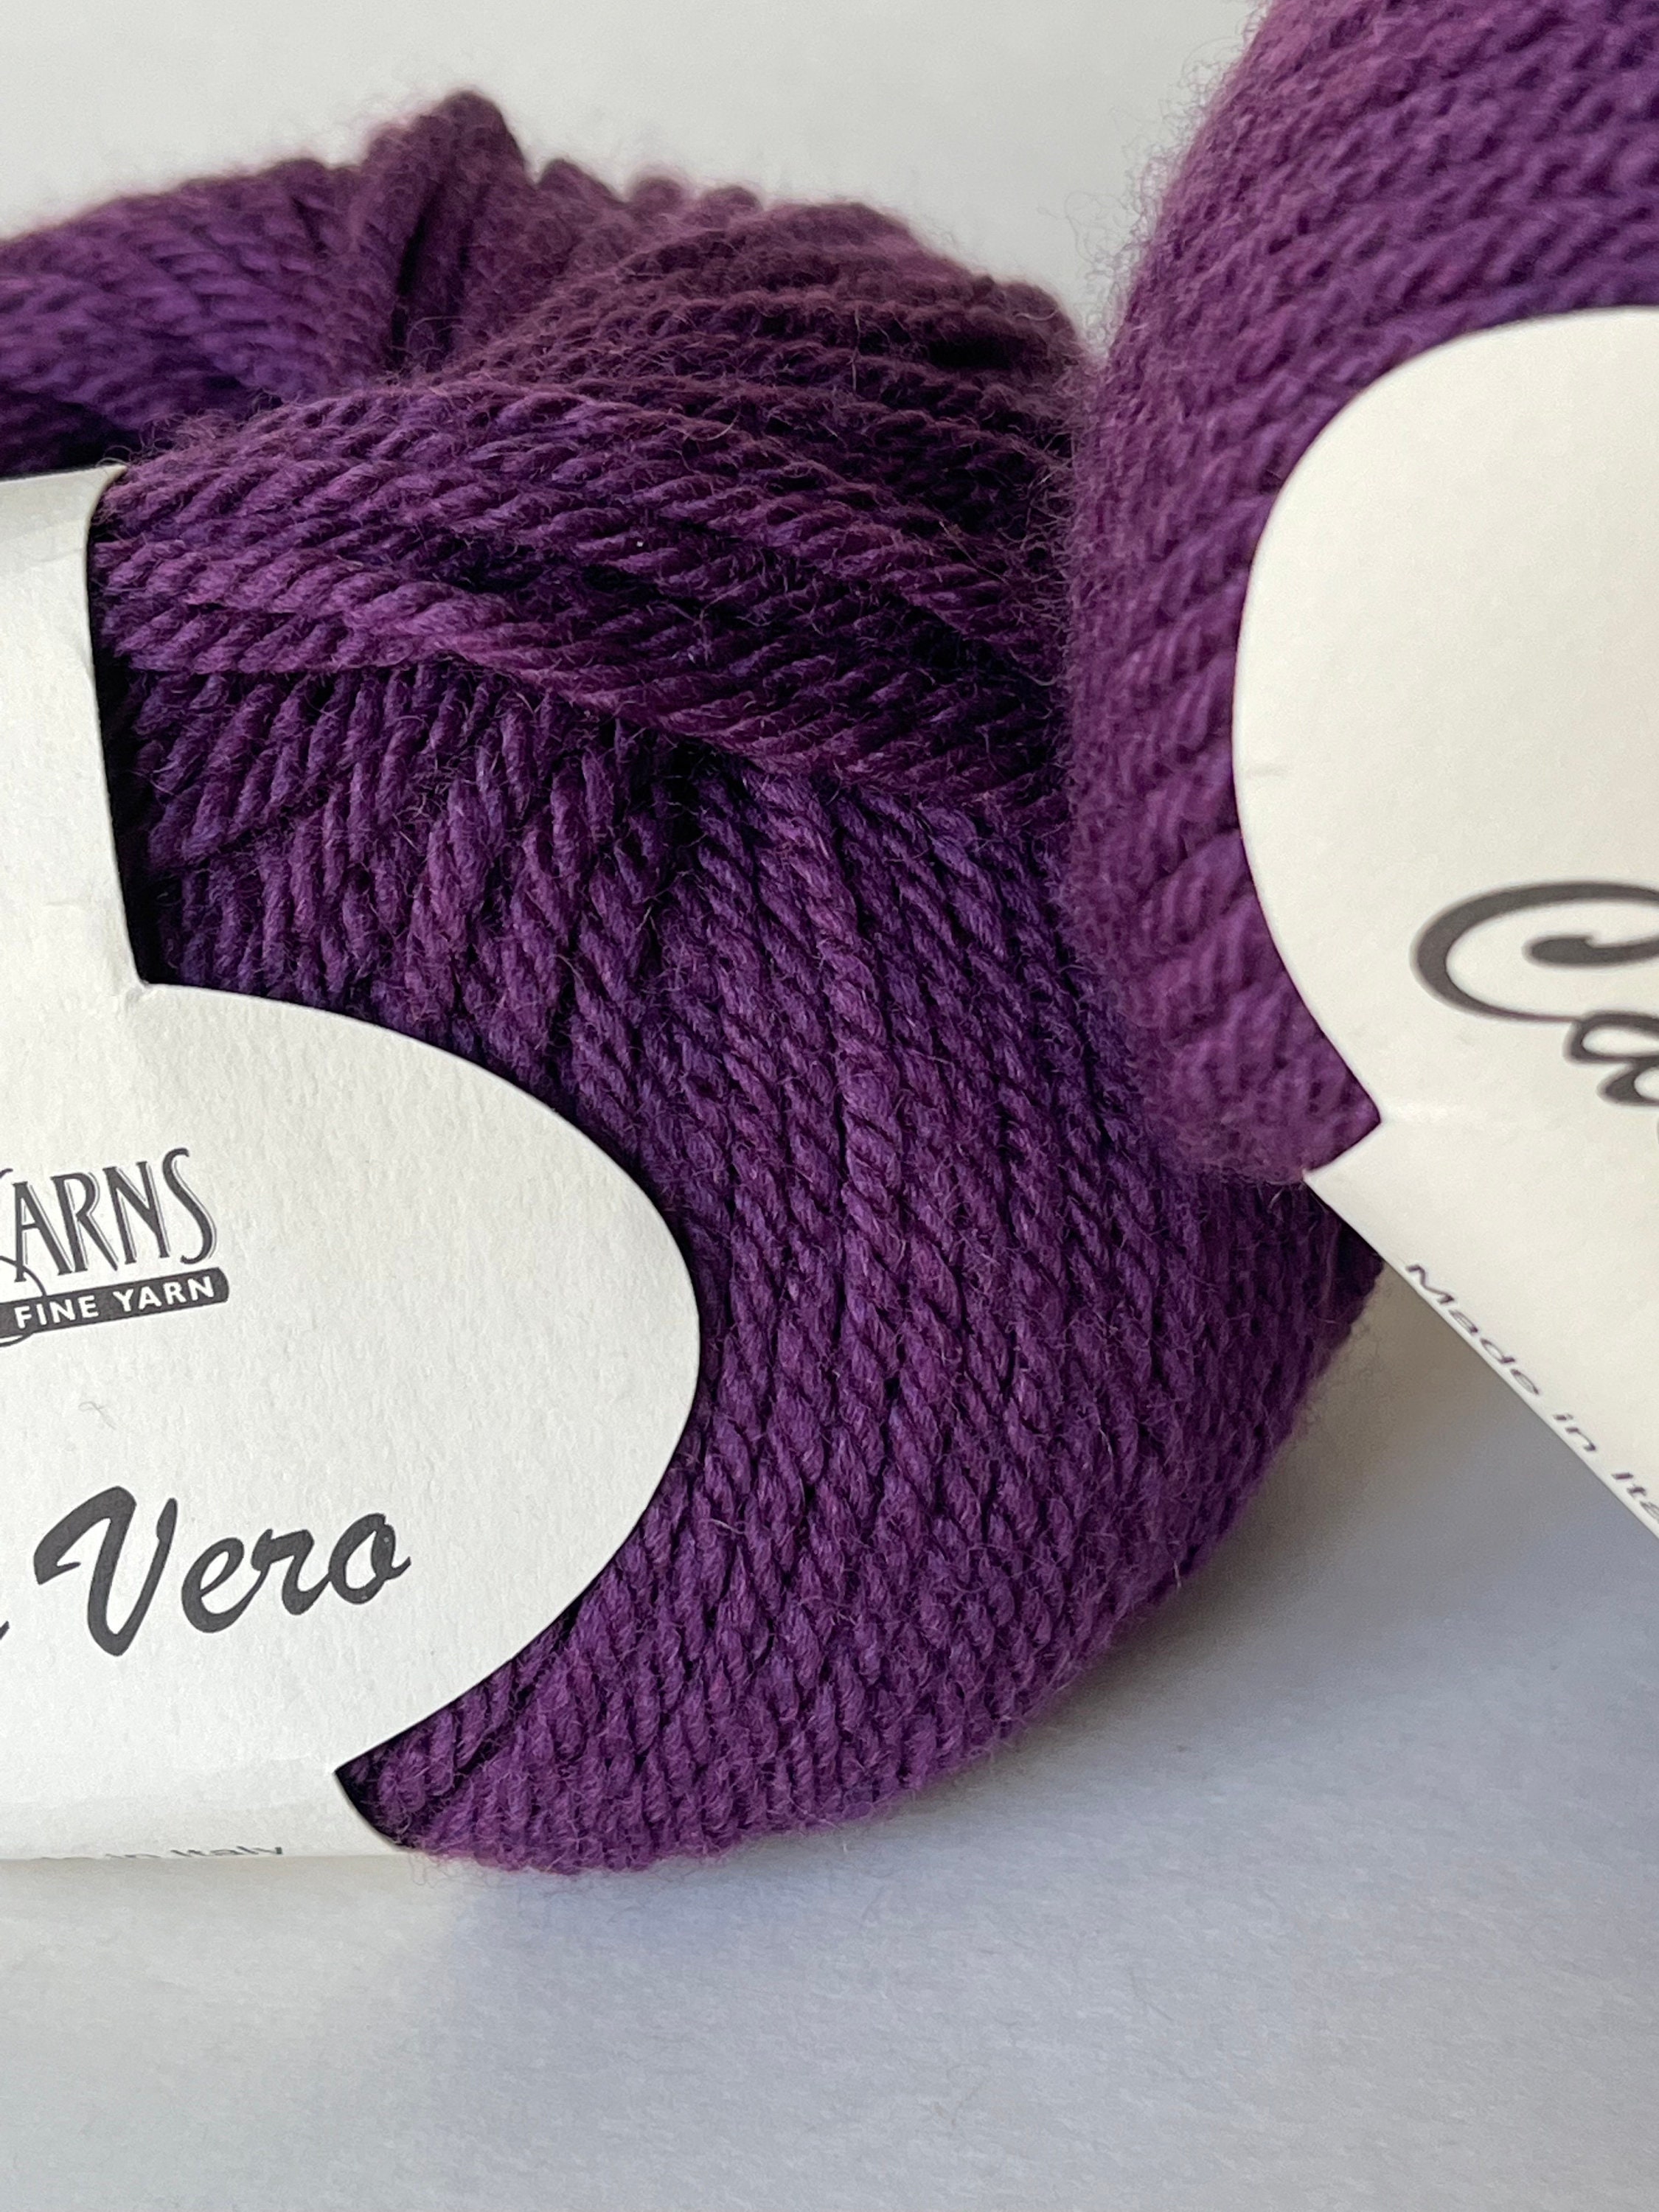 Luxe Cotton Blend Yarn 100g 220m 8ply - Lilac - Discount Craft